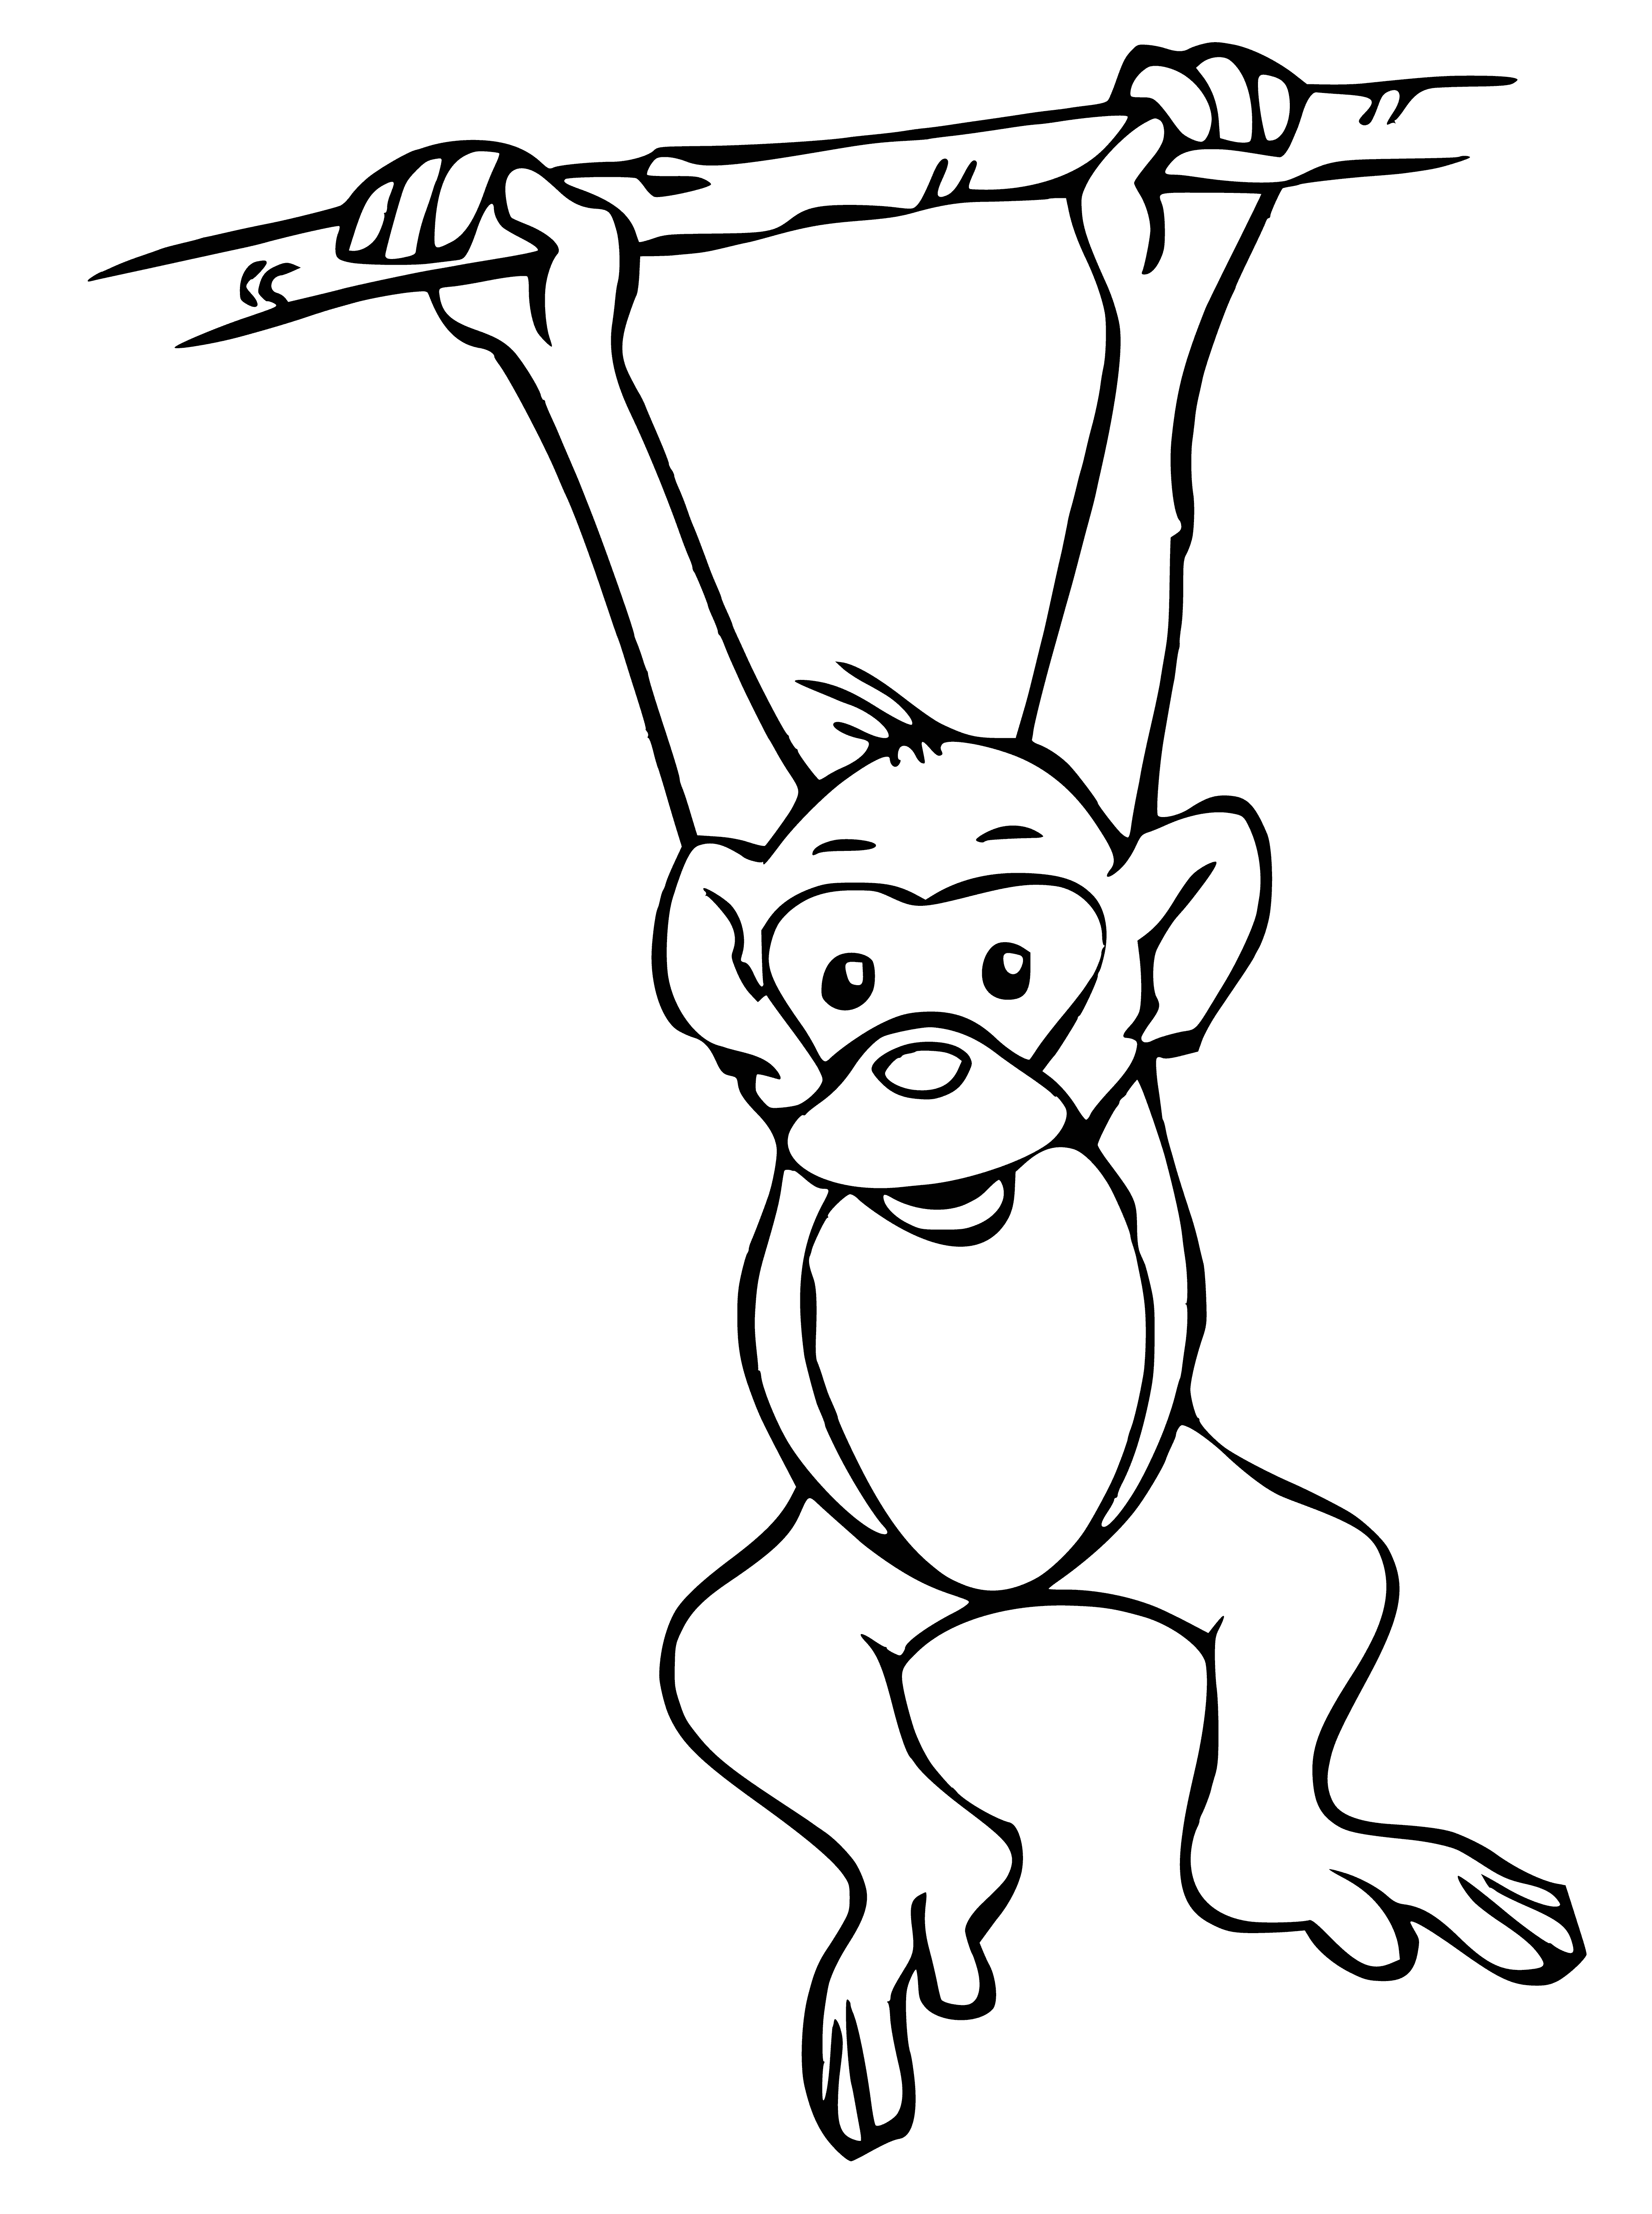 coloring page: Monkey sitting on branch w/brown body & black face eating a banana from a tree w/green leaves.